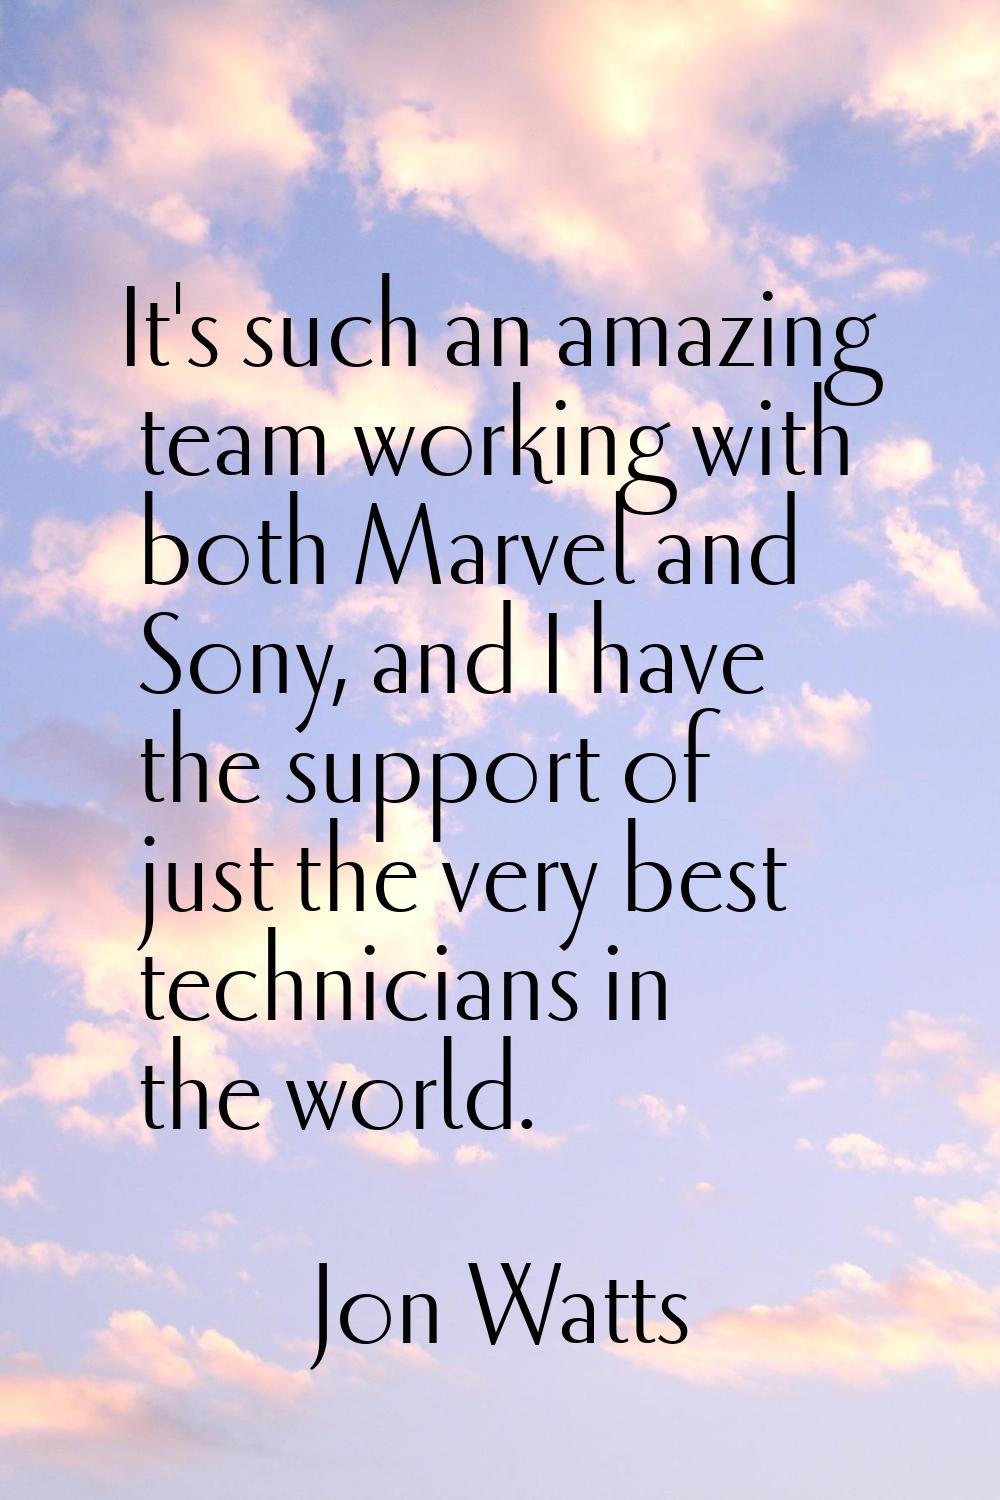 It's such an amazing team working with both Marvel and Sony, and I have the support of just the ver